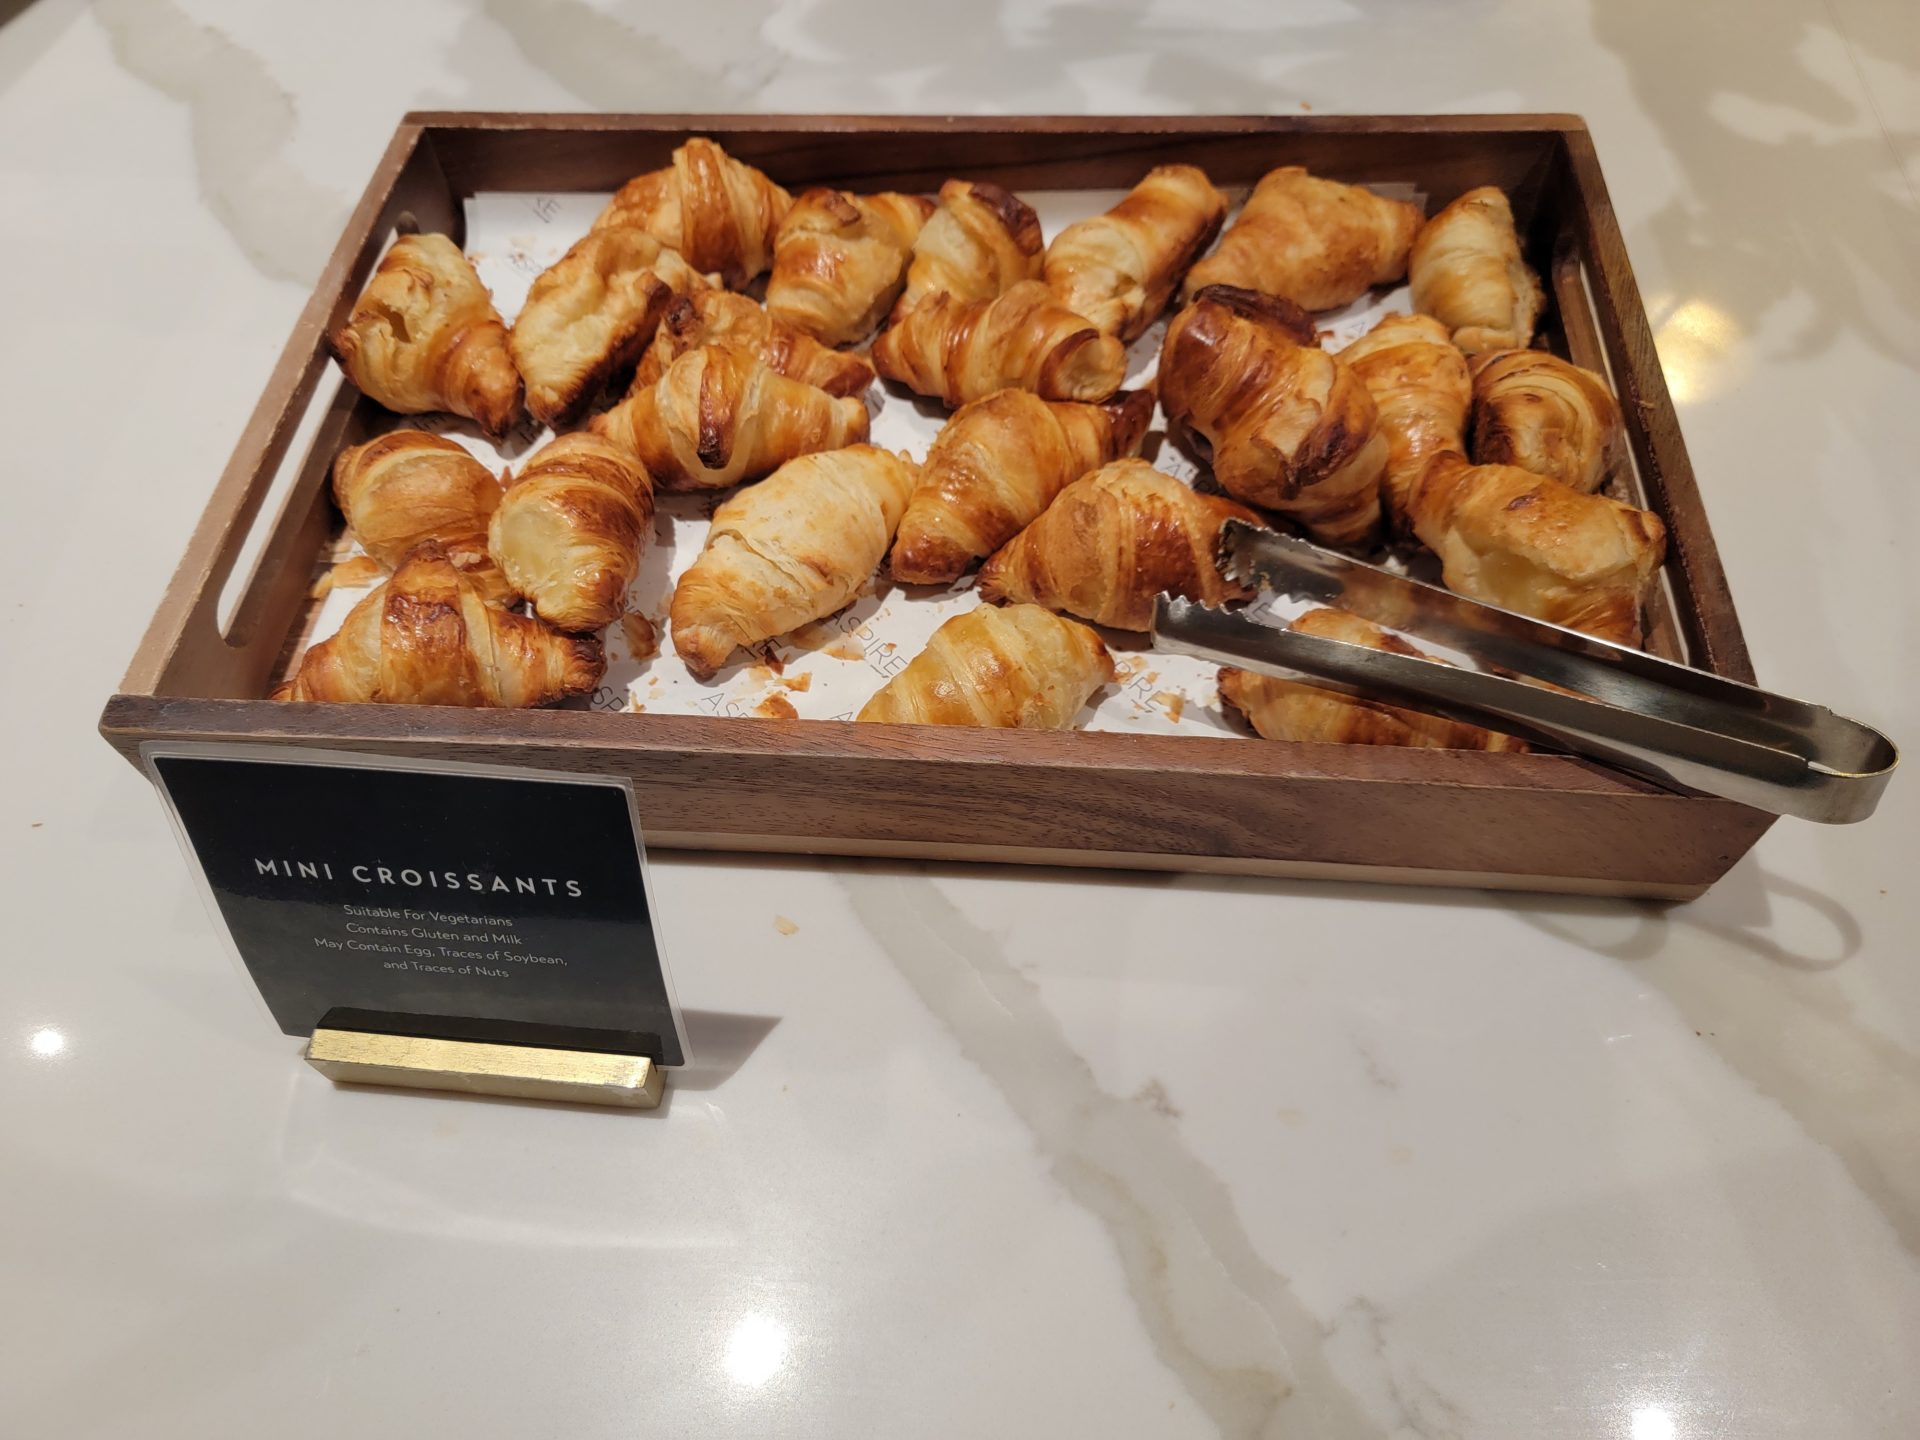 a tray of croissants on a table